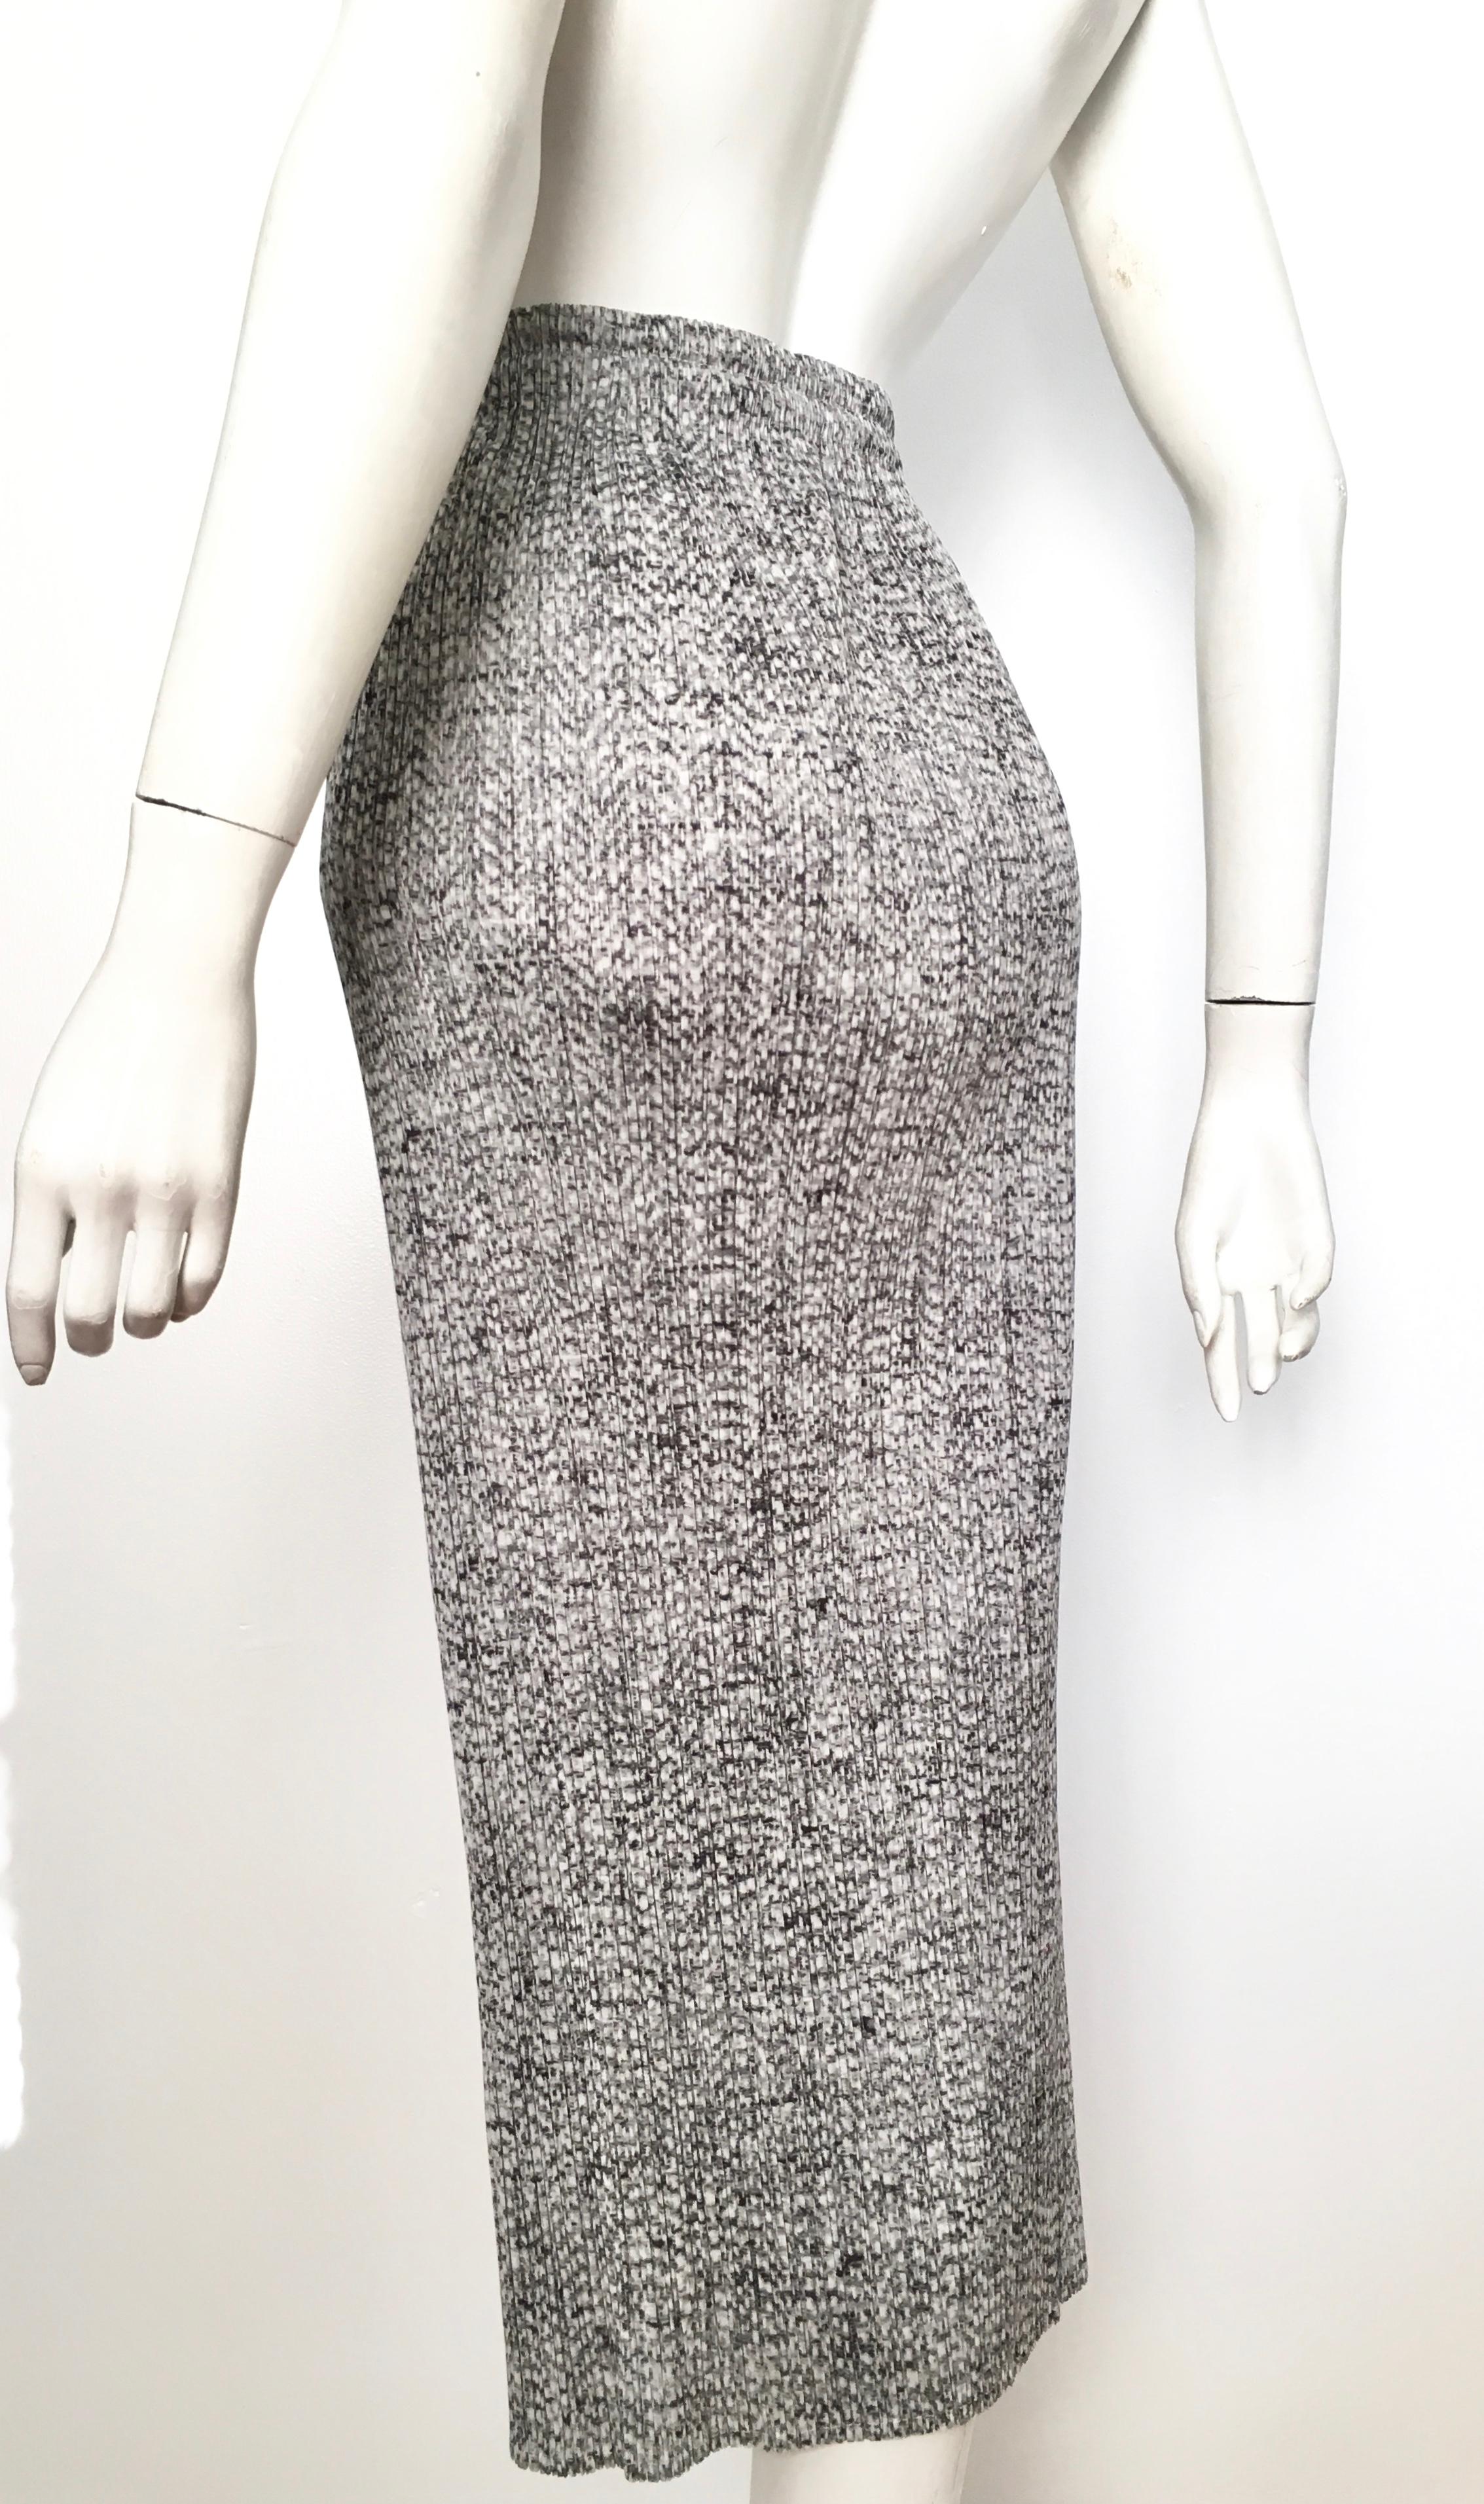 Issey Miyake Pleats Please 1990s Black & White Long Skirt Size Small. 3